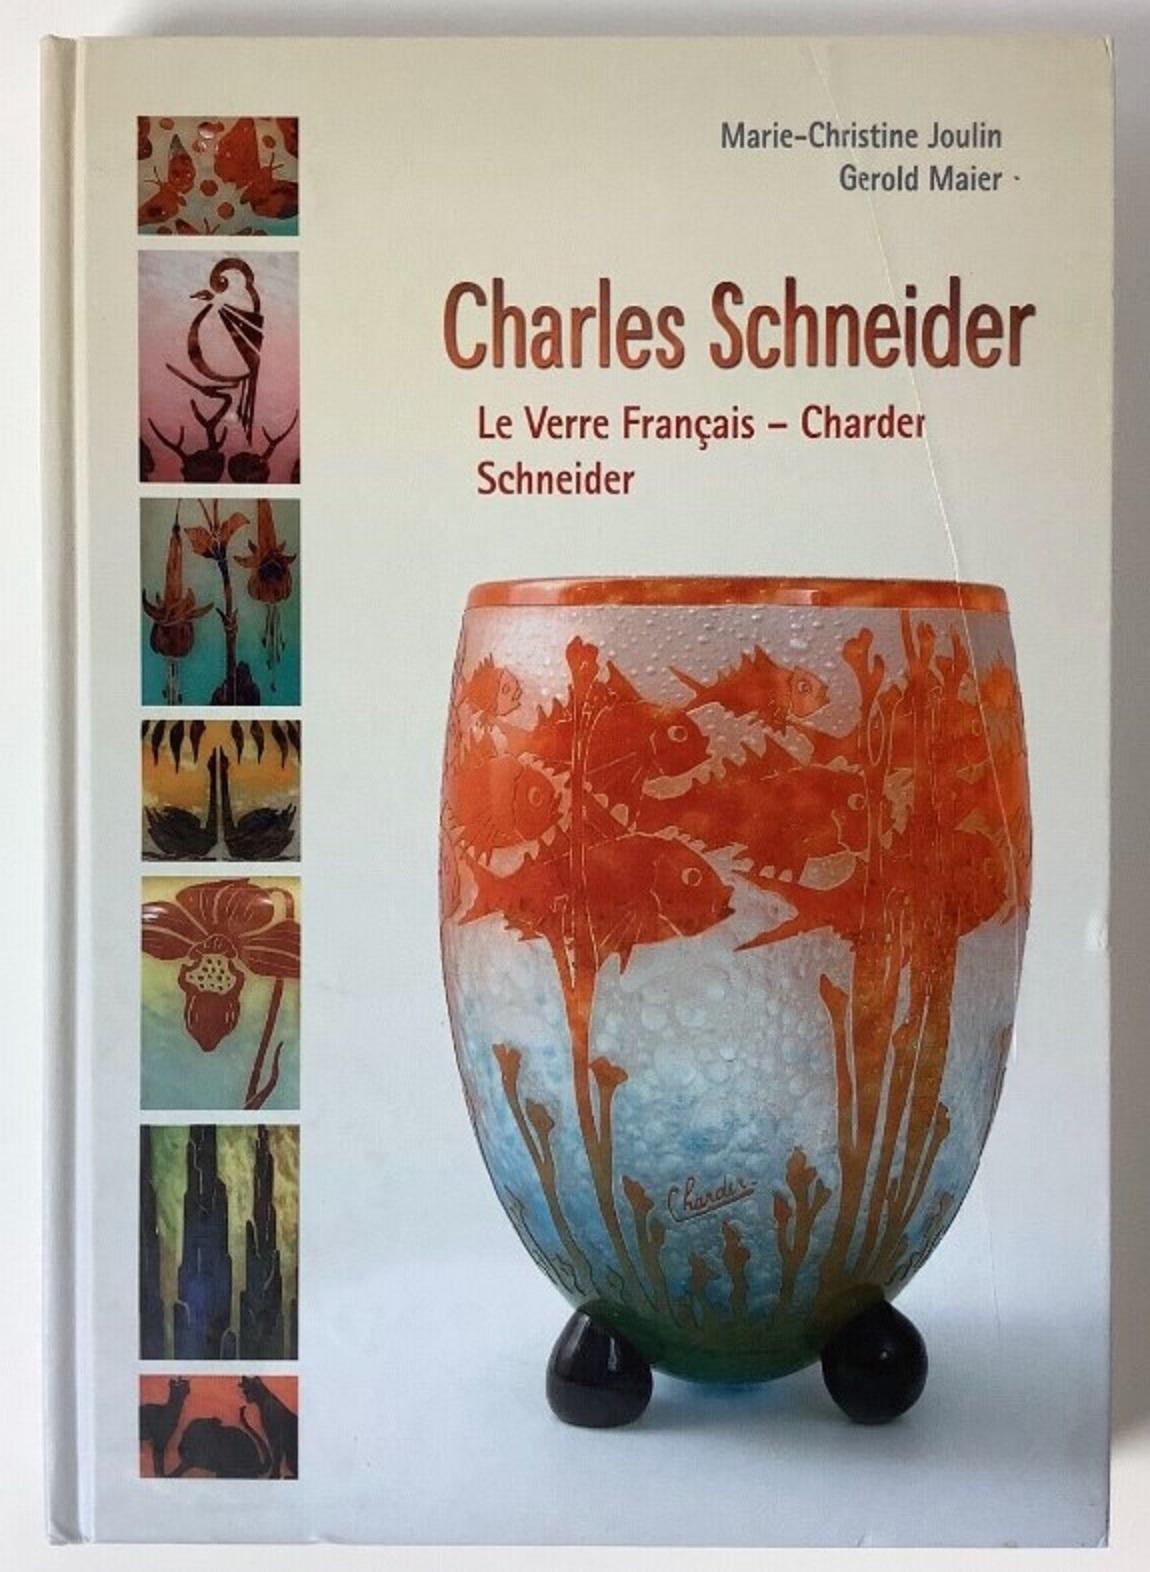 Vase ( Decoration Muscats ) Sign: Le Verre Francais 
acid worked
Le Verre cameo glass was a separate line of art glass designed by Charles Schneider. Its production was made at the same time as the Schneider designed glasses 1918 –1933. But from